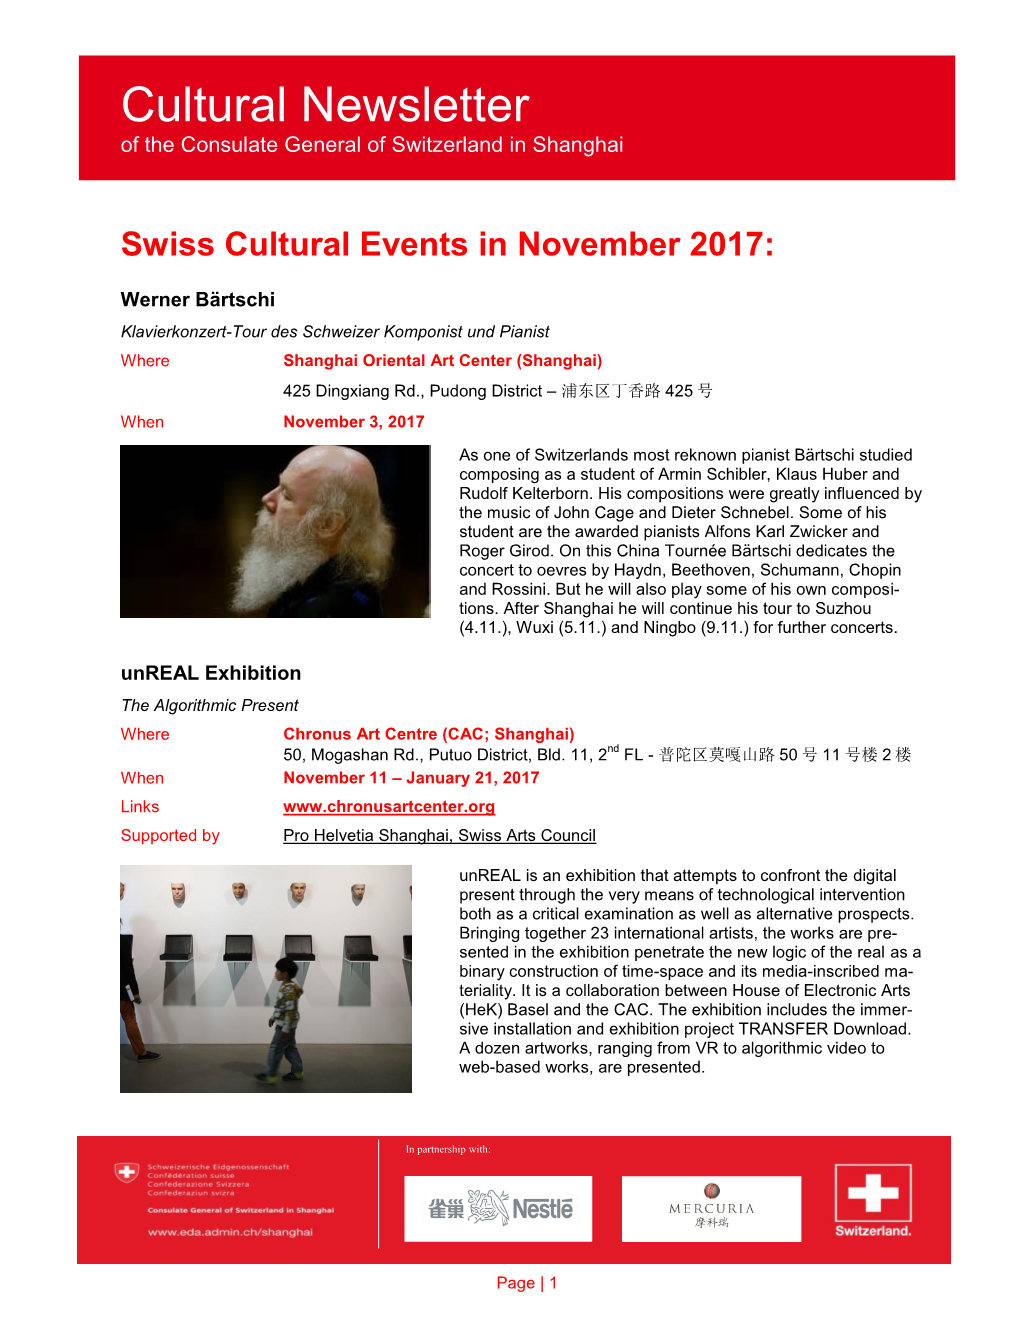 Swiss Cultural Events in November 2017